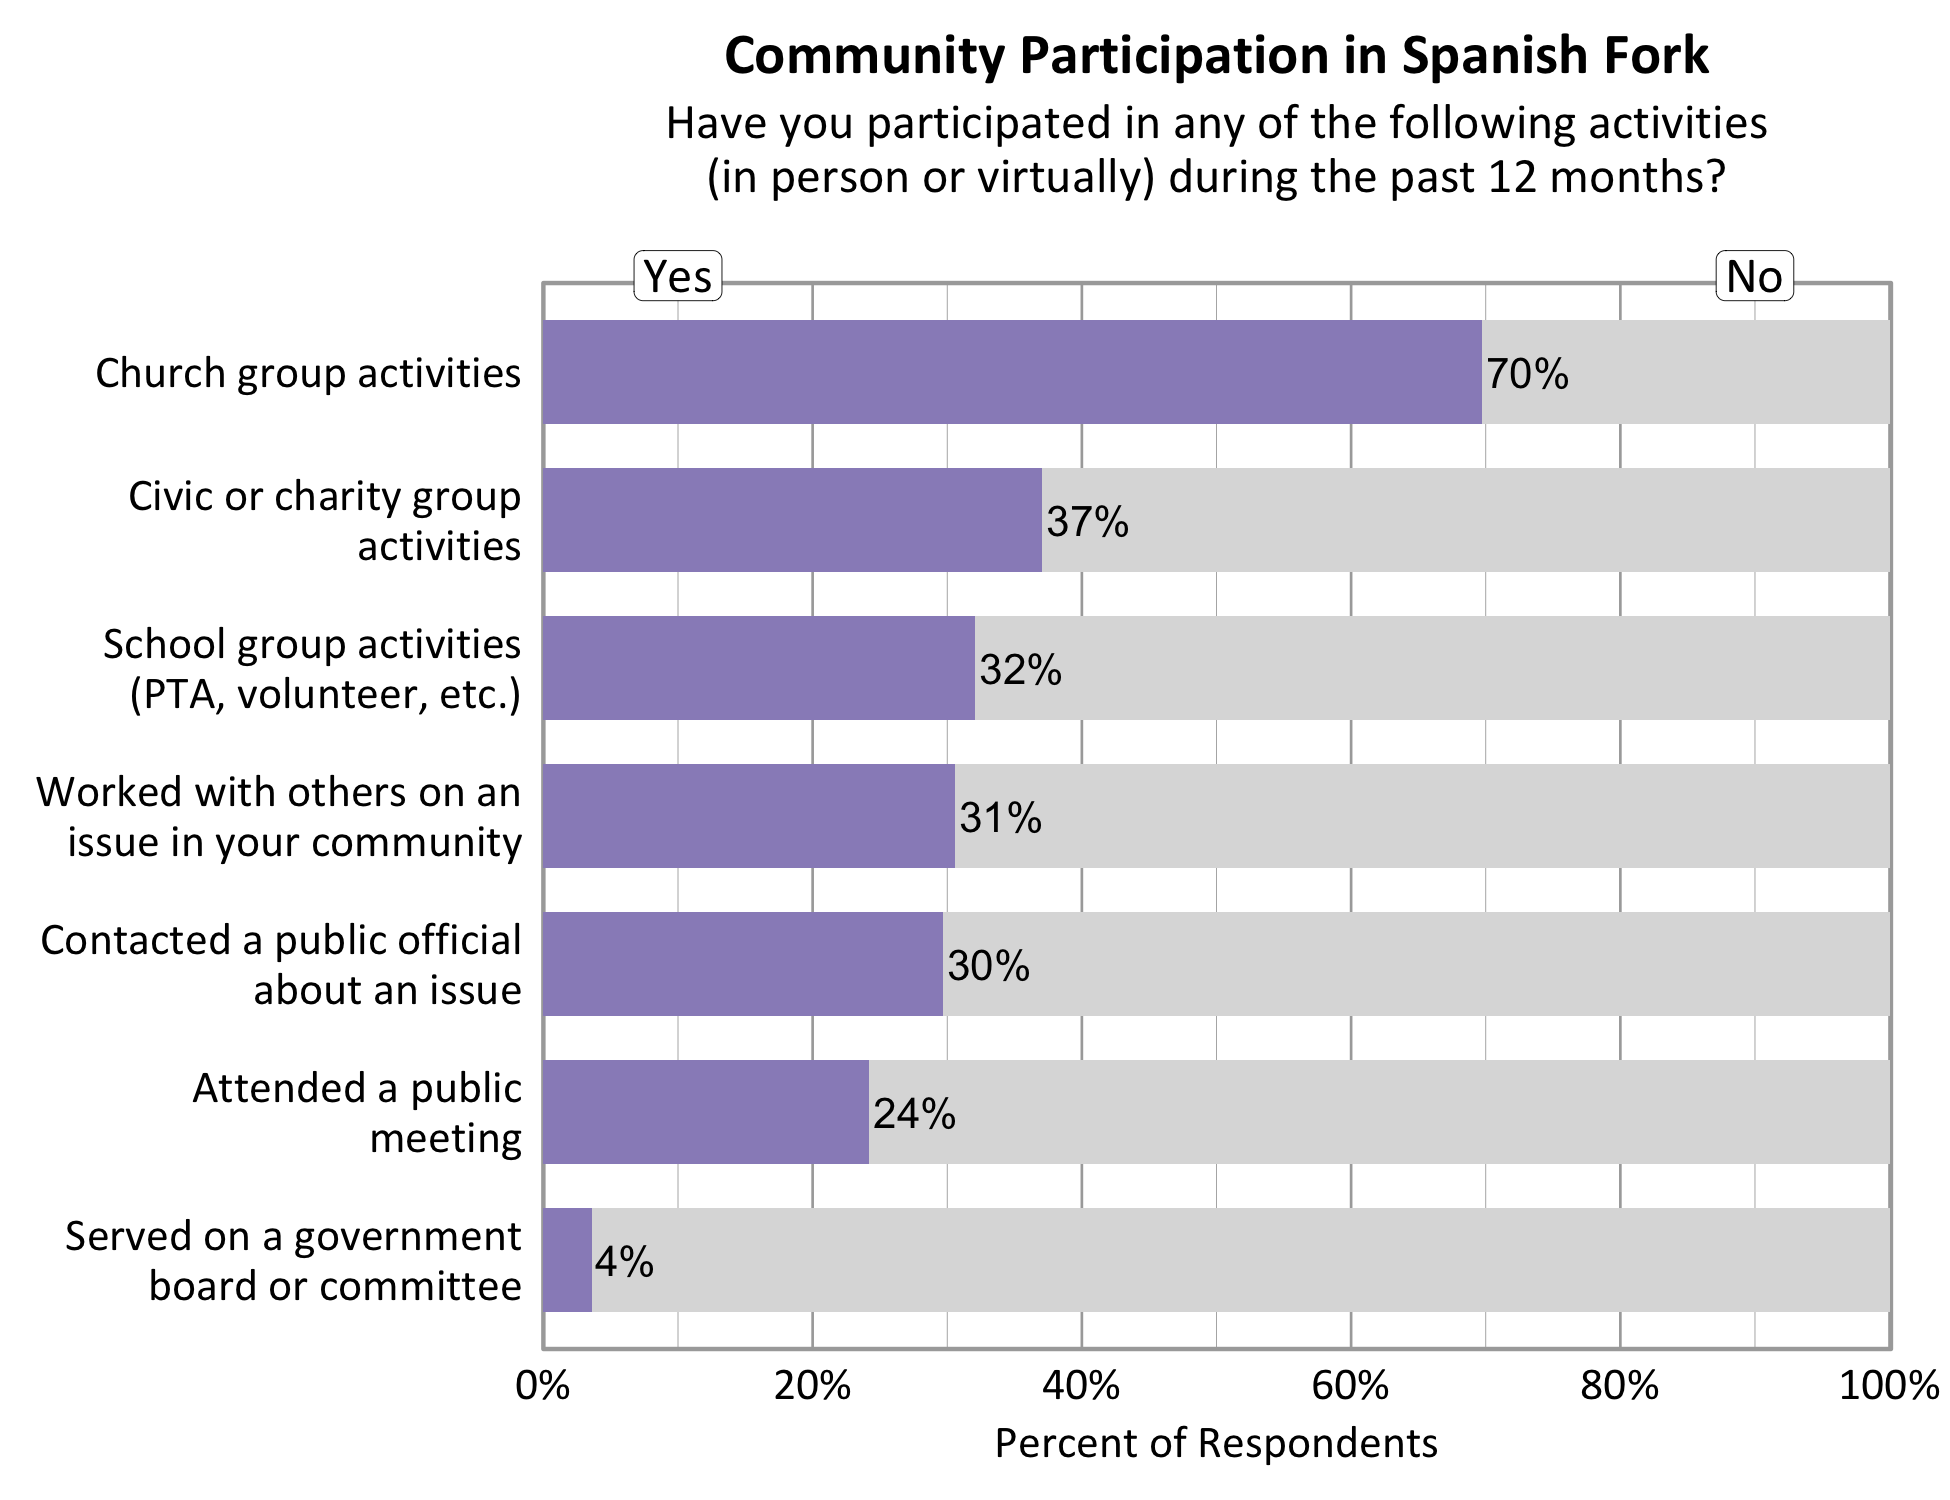 Type: Bar Graph Title: Community Participation in Spanish Fork. Subtitle: Have you participated in any of the following activities (in person or virtually) during the past 12 months? Data - 70% of respondents indicated yes to church group activities. 31% of respondents indicated yes to working with others on an issue in your community. 30% of respondents indicated yes to contacting a public official about an issue. 37% of respondents indicated yes to a civic or charity group activity. 32% of respondents indicated yes to participating in School group activities. 24% of respondents indicated yes to attending a public meeting. 4% of respondents indicated yes to serving on a government board or committee. 